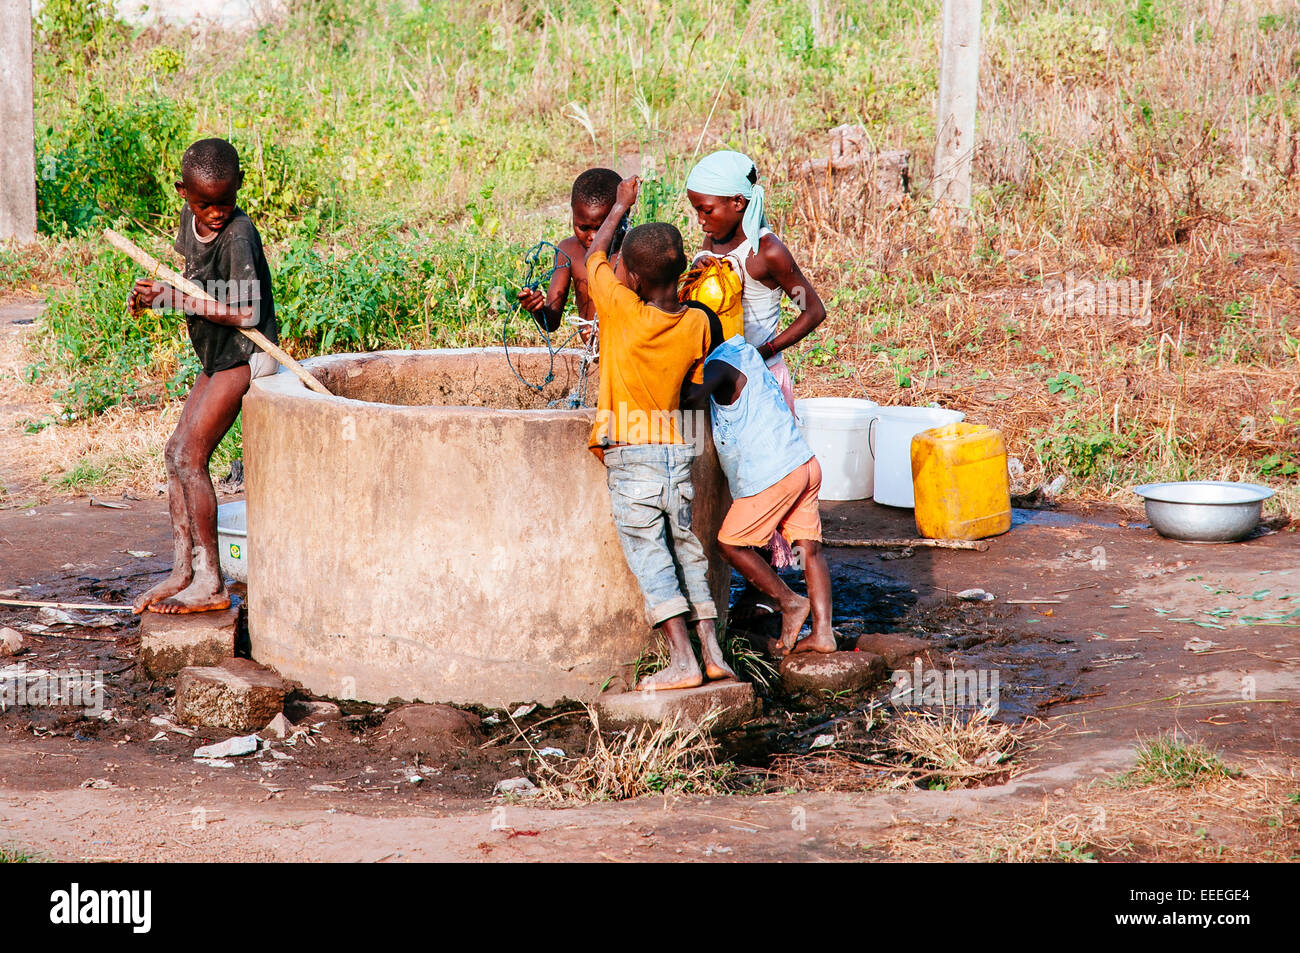 Children collecting water from a well, Ghana Stock Photo